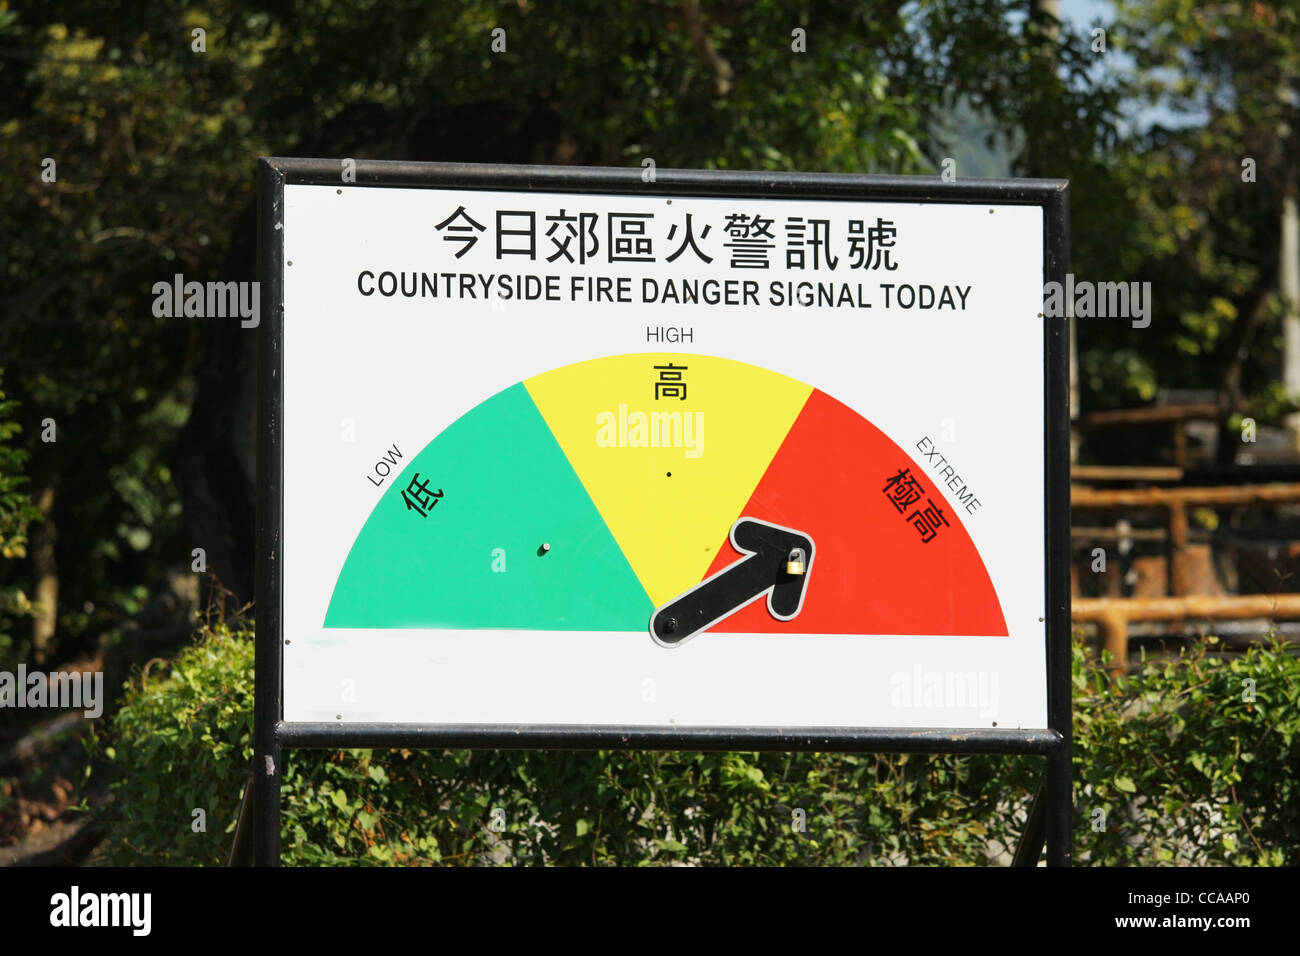 Countryside fire danger signal Stock Photo